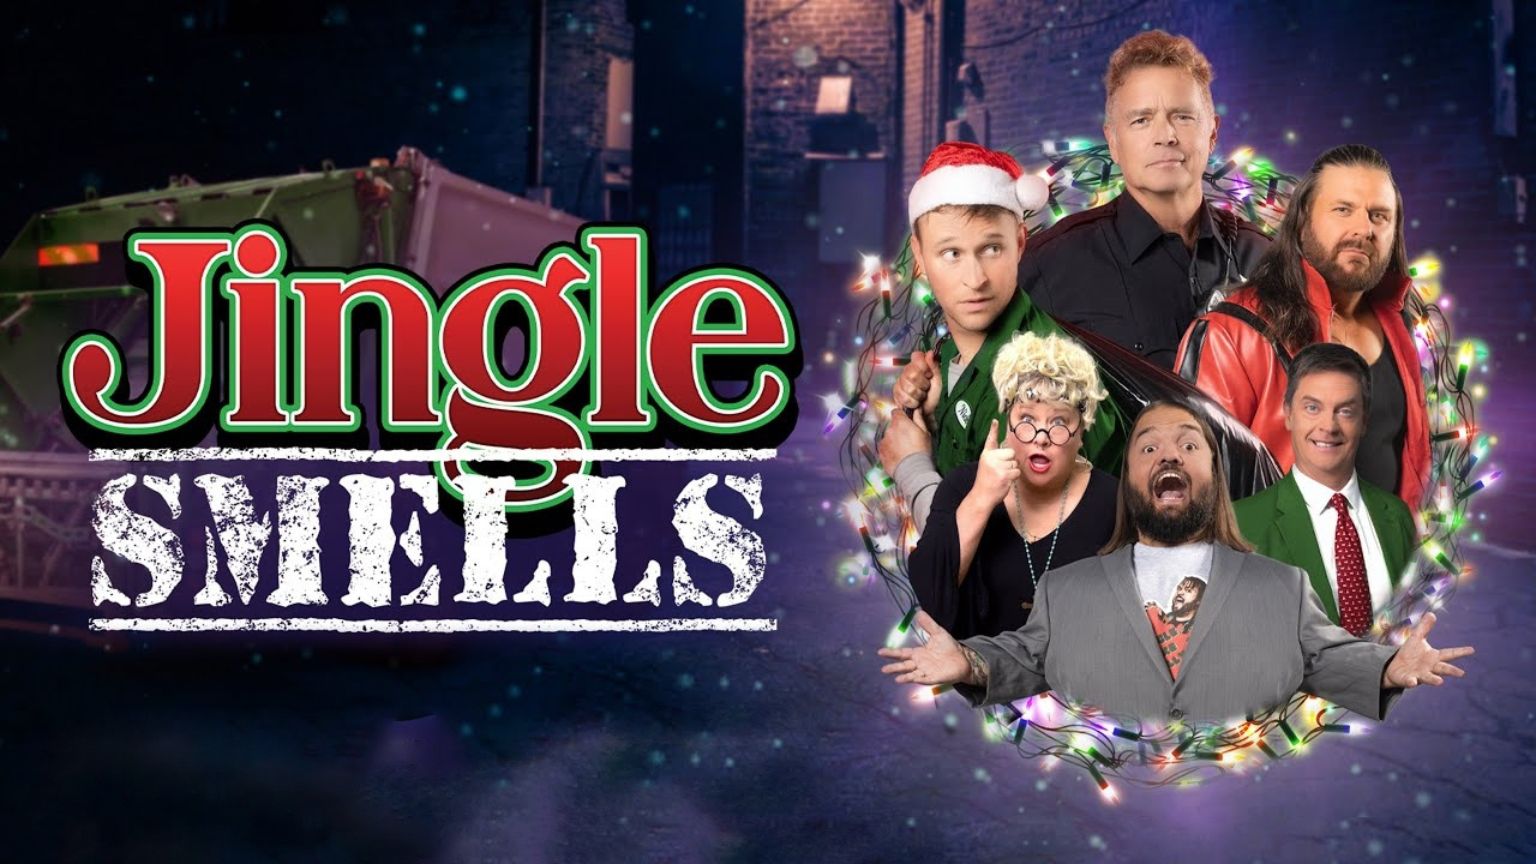 Original Christmas Movie “Jingle Smells” Launches on Rumble